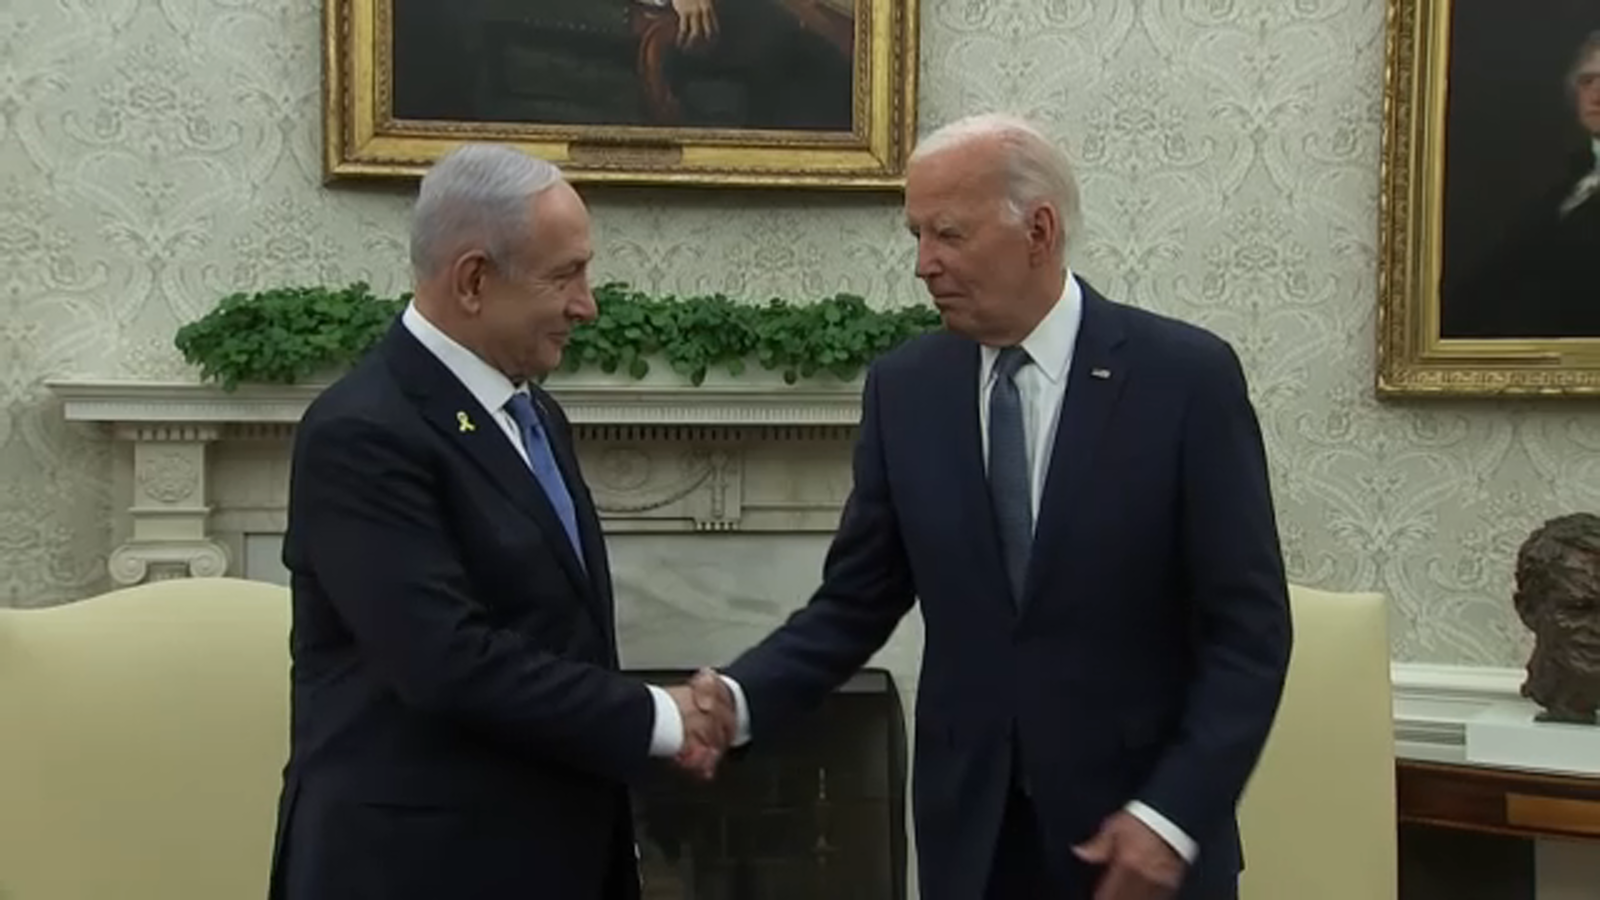 Extra Time: High stakes meeting between Netanyahu and Biden, Listeria outbreak raising concerns [Video]